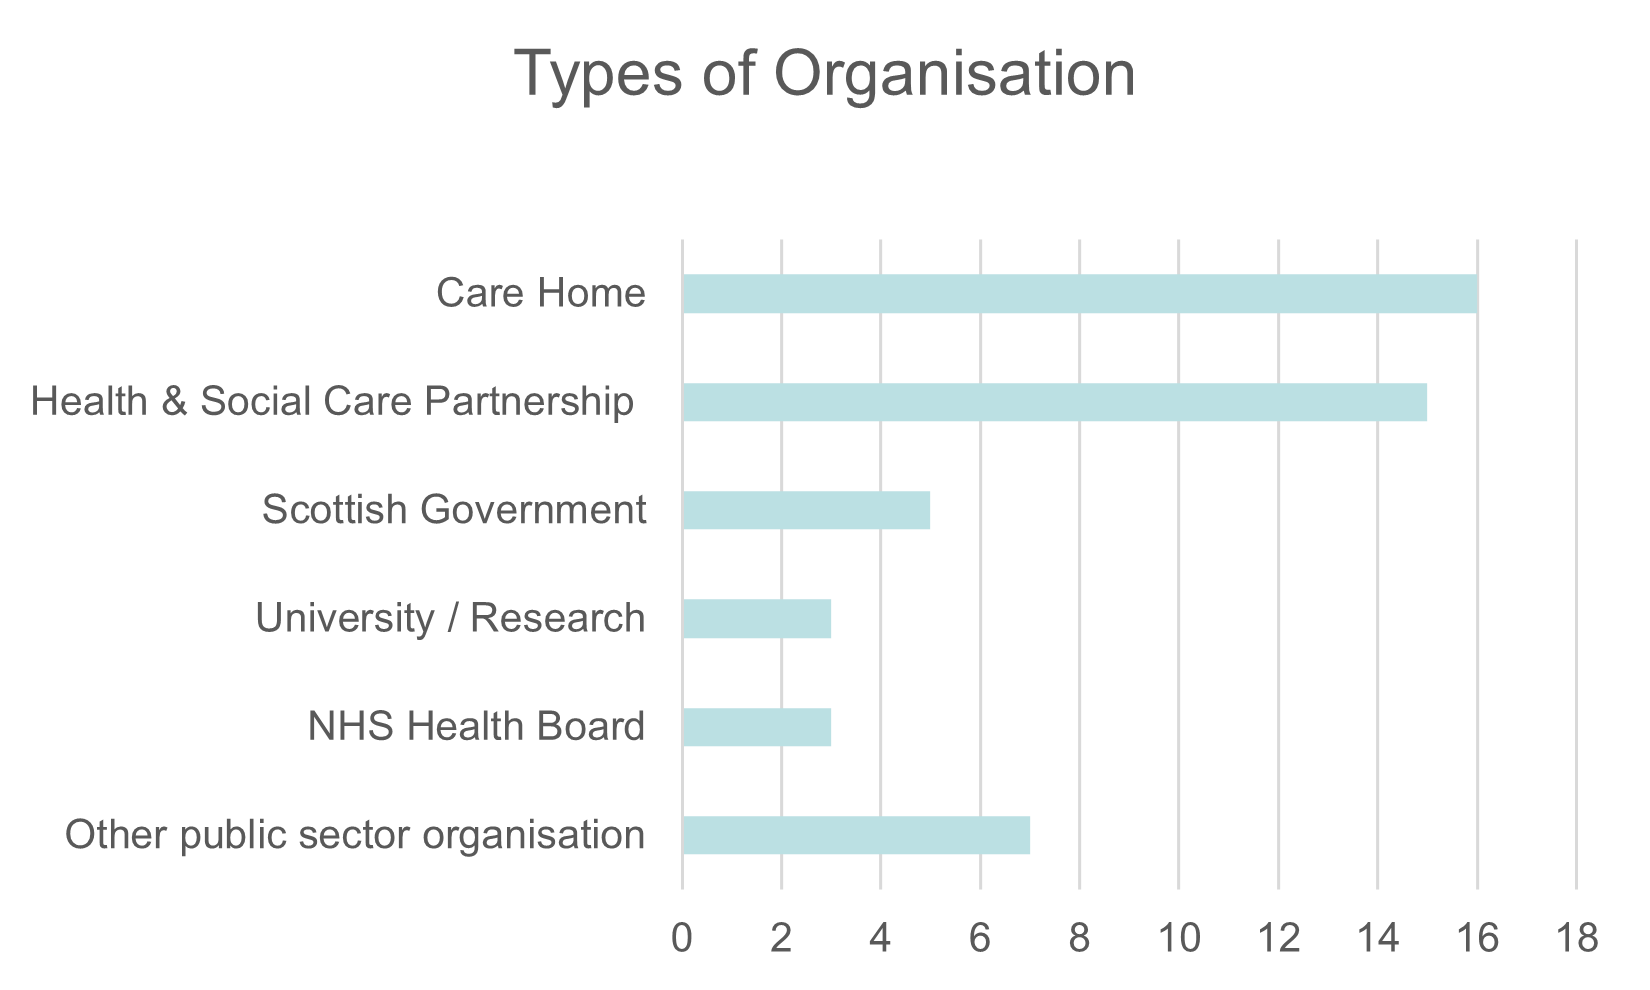 This chart shows the organisations that the respondents represented. It was possible for a respondent to represent multiple organisations. The results are as follows: Care Home 16, Health and Social Care Partnership 5, University/Research 3, NHS Health Board 3, Other public sector organisation 7.